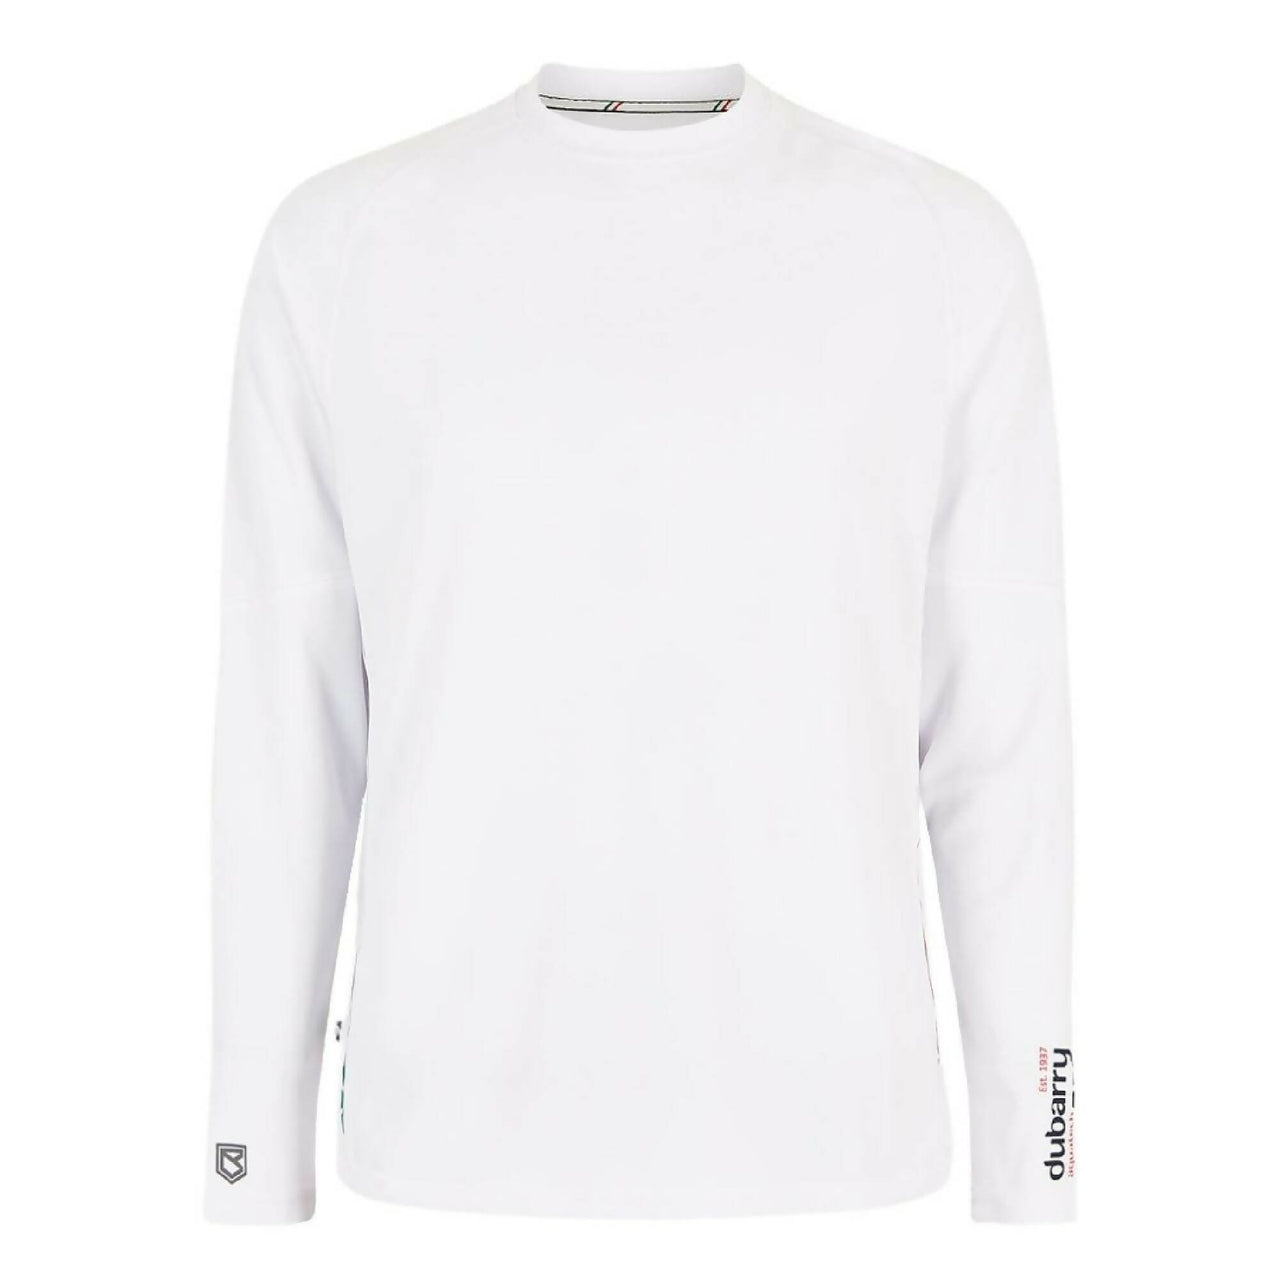 DUBARRY Ancona Long Sleeve T-Shirt WHITE (Online only*)